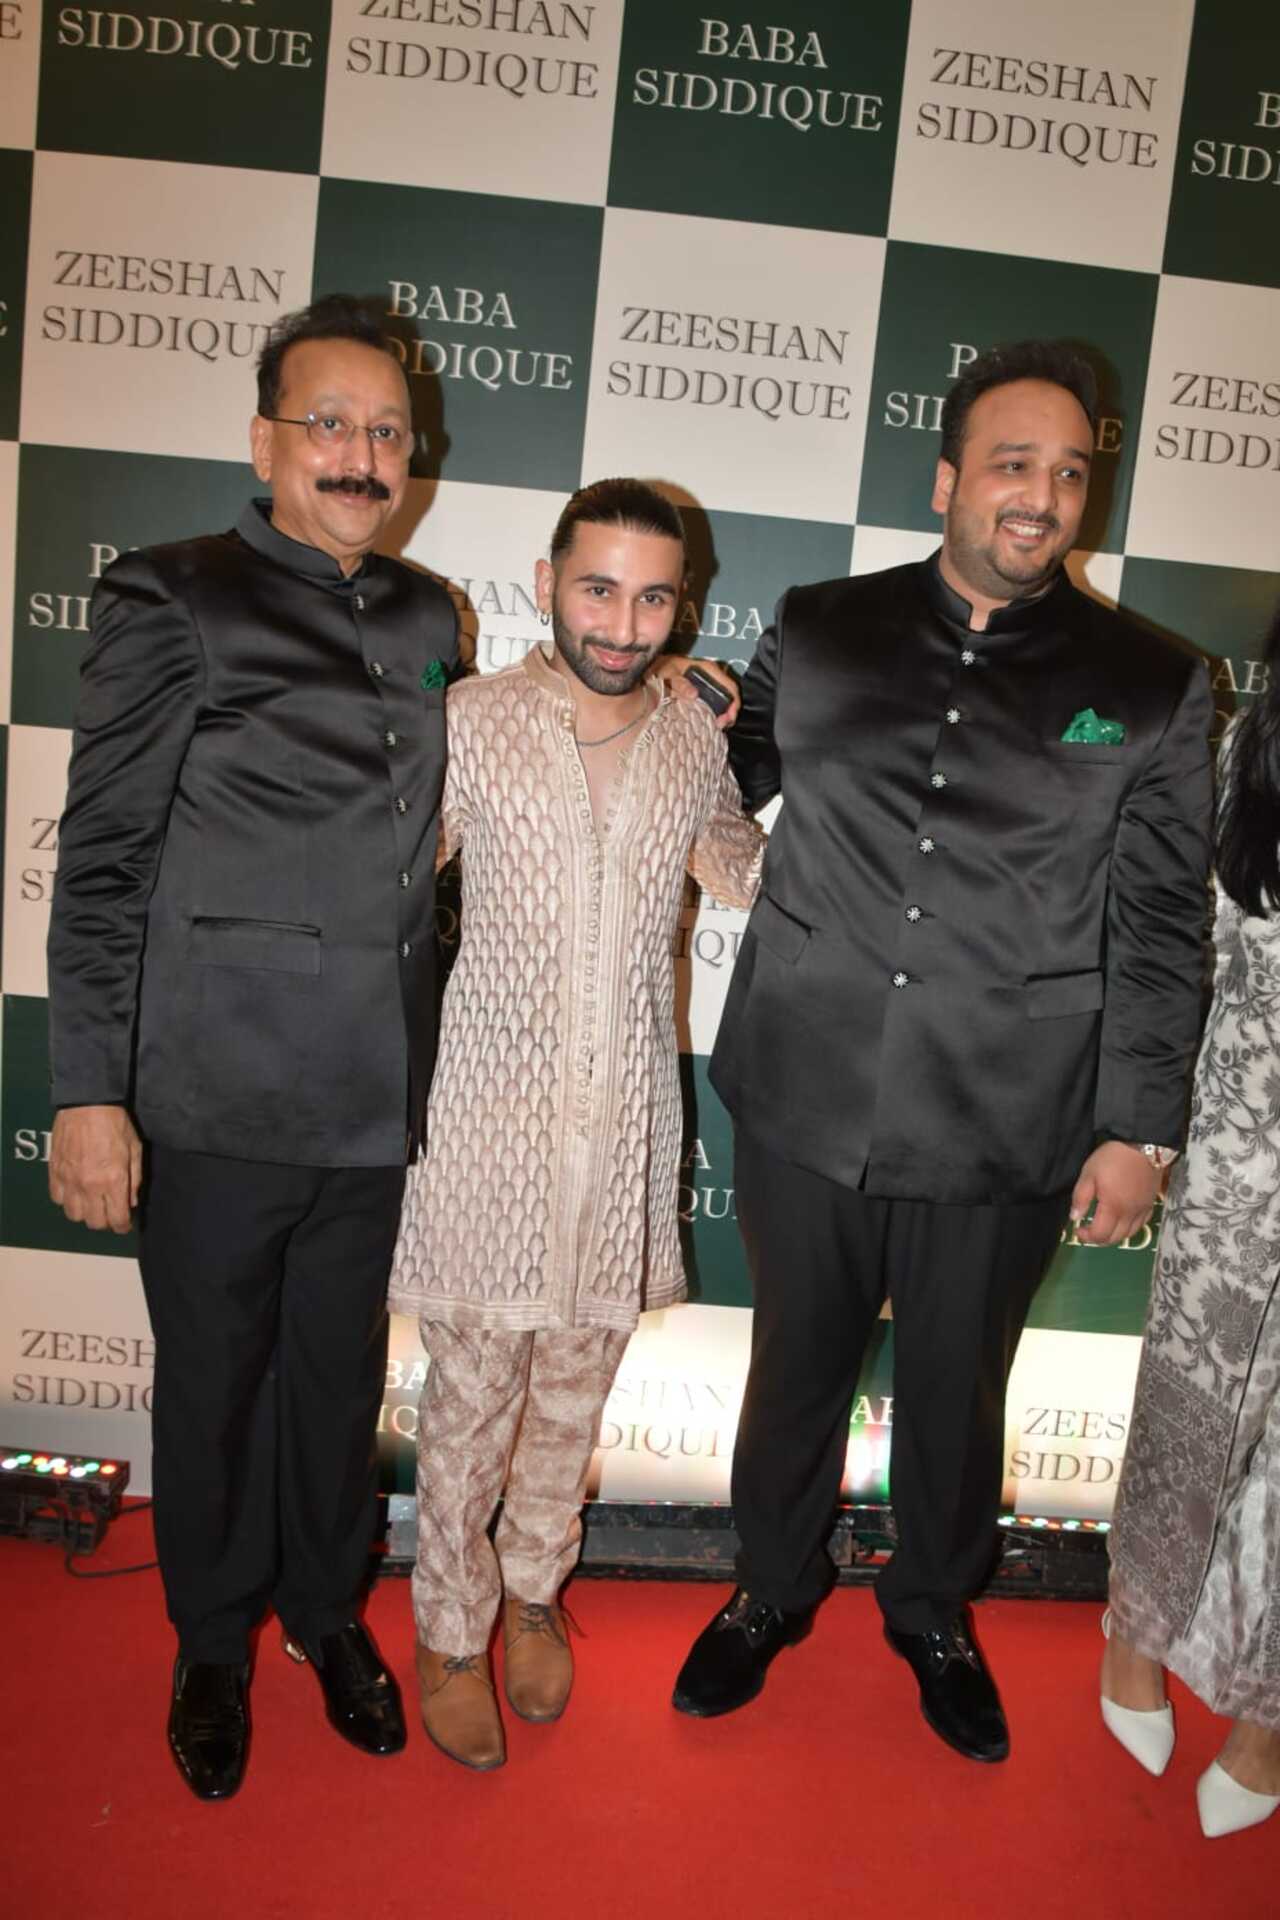 Orry poses with Zeeshan and Baba Siddique